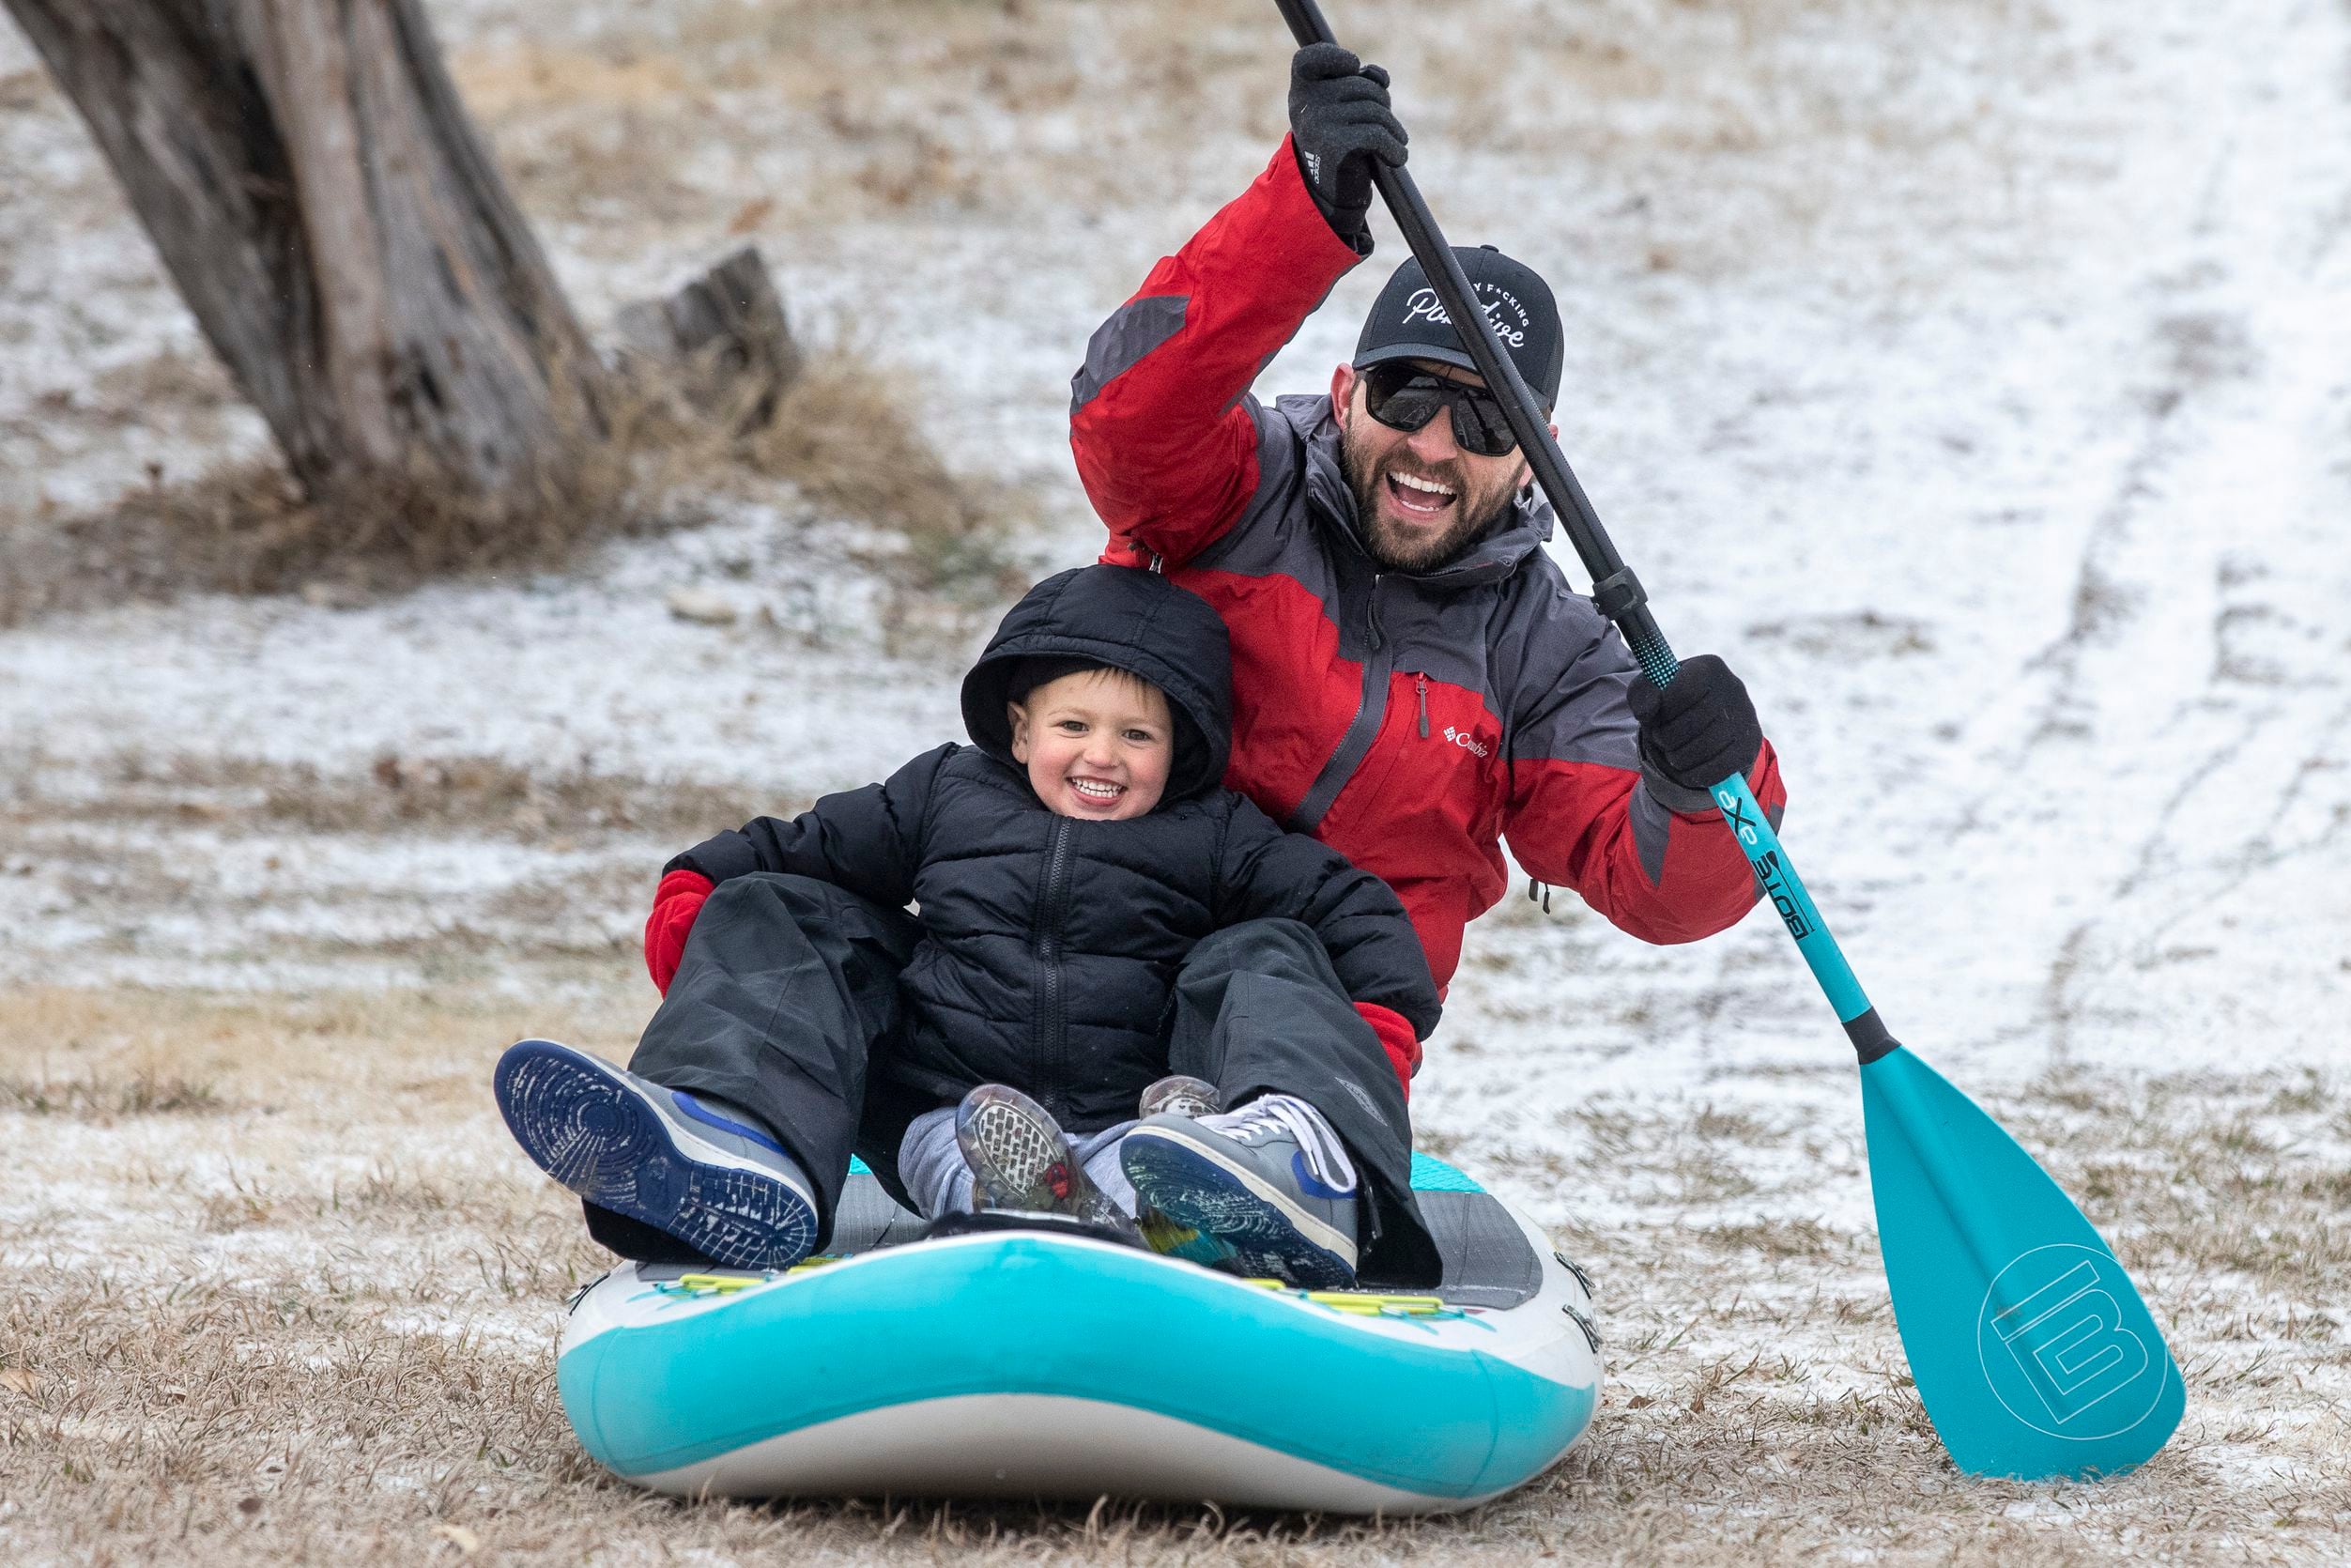 John Bain and his son, Everett, 3, sled down a hill on a paddleboard in the snow at Flag...